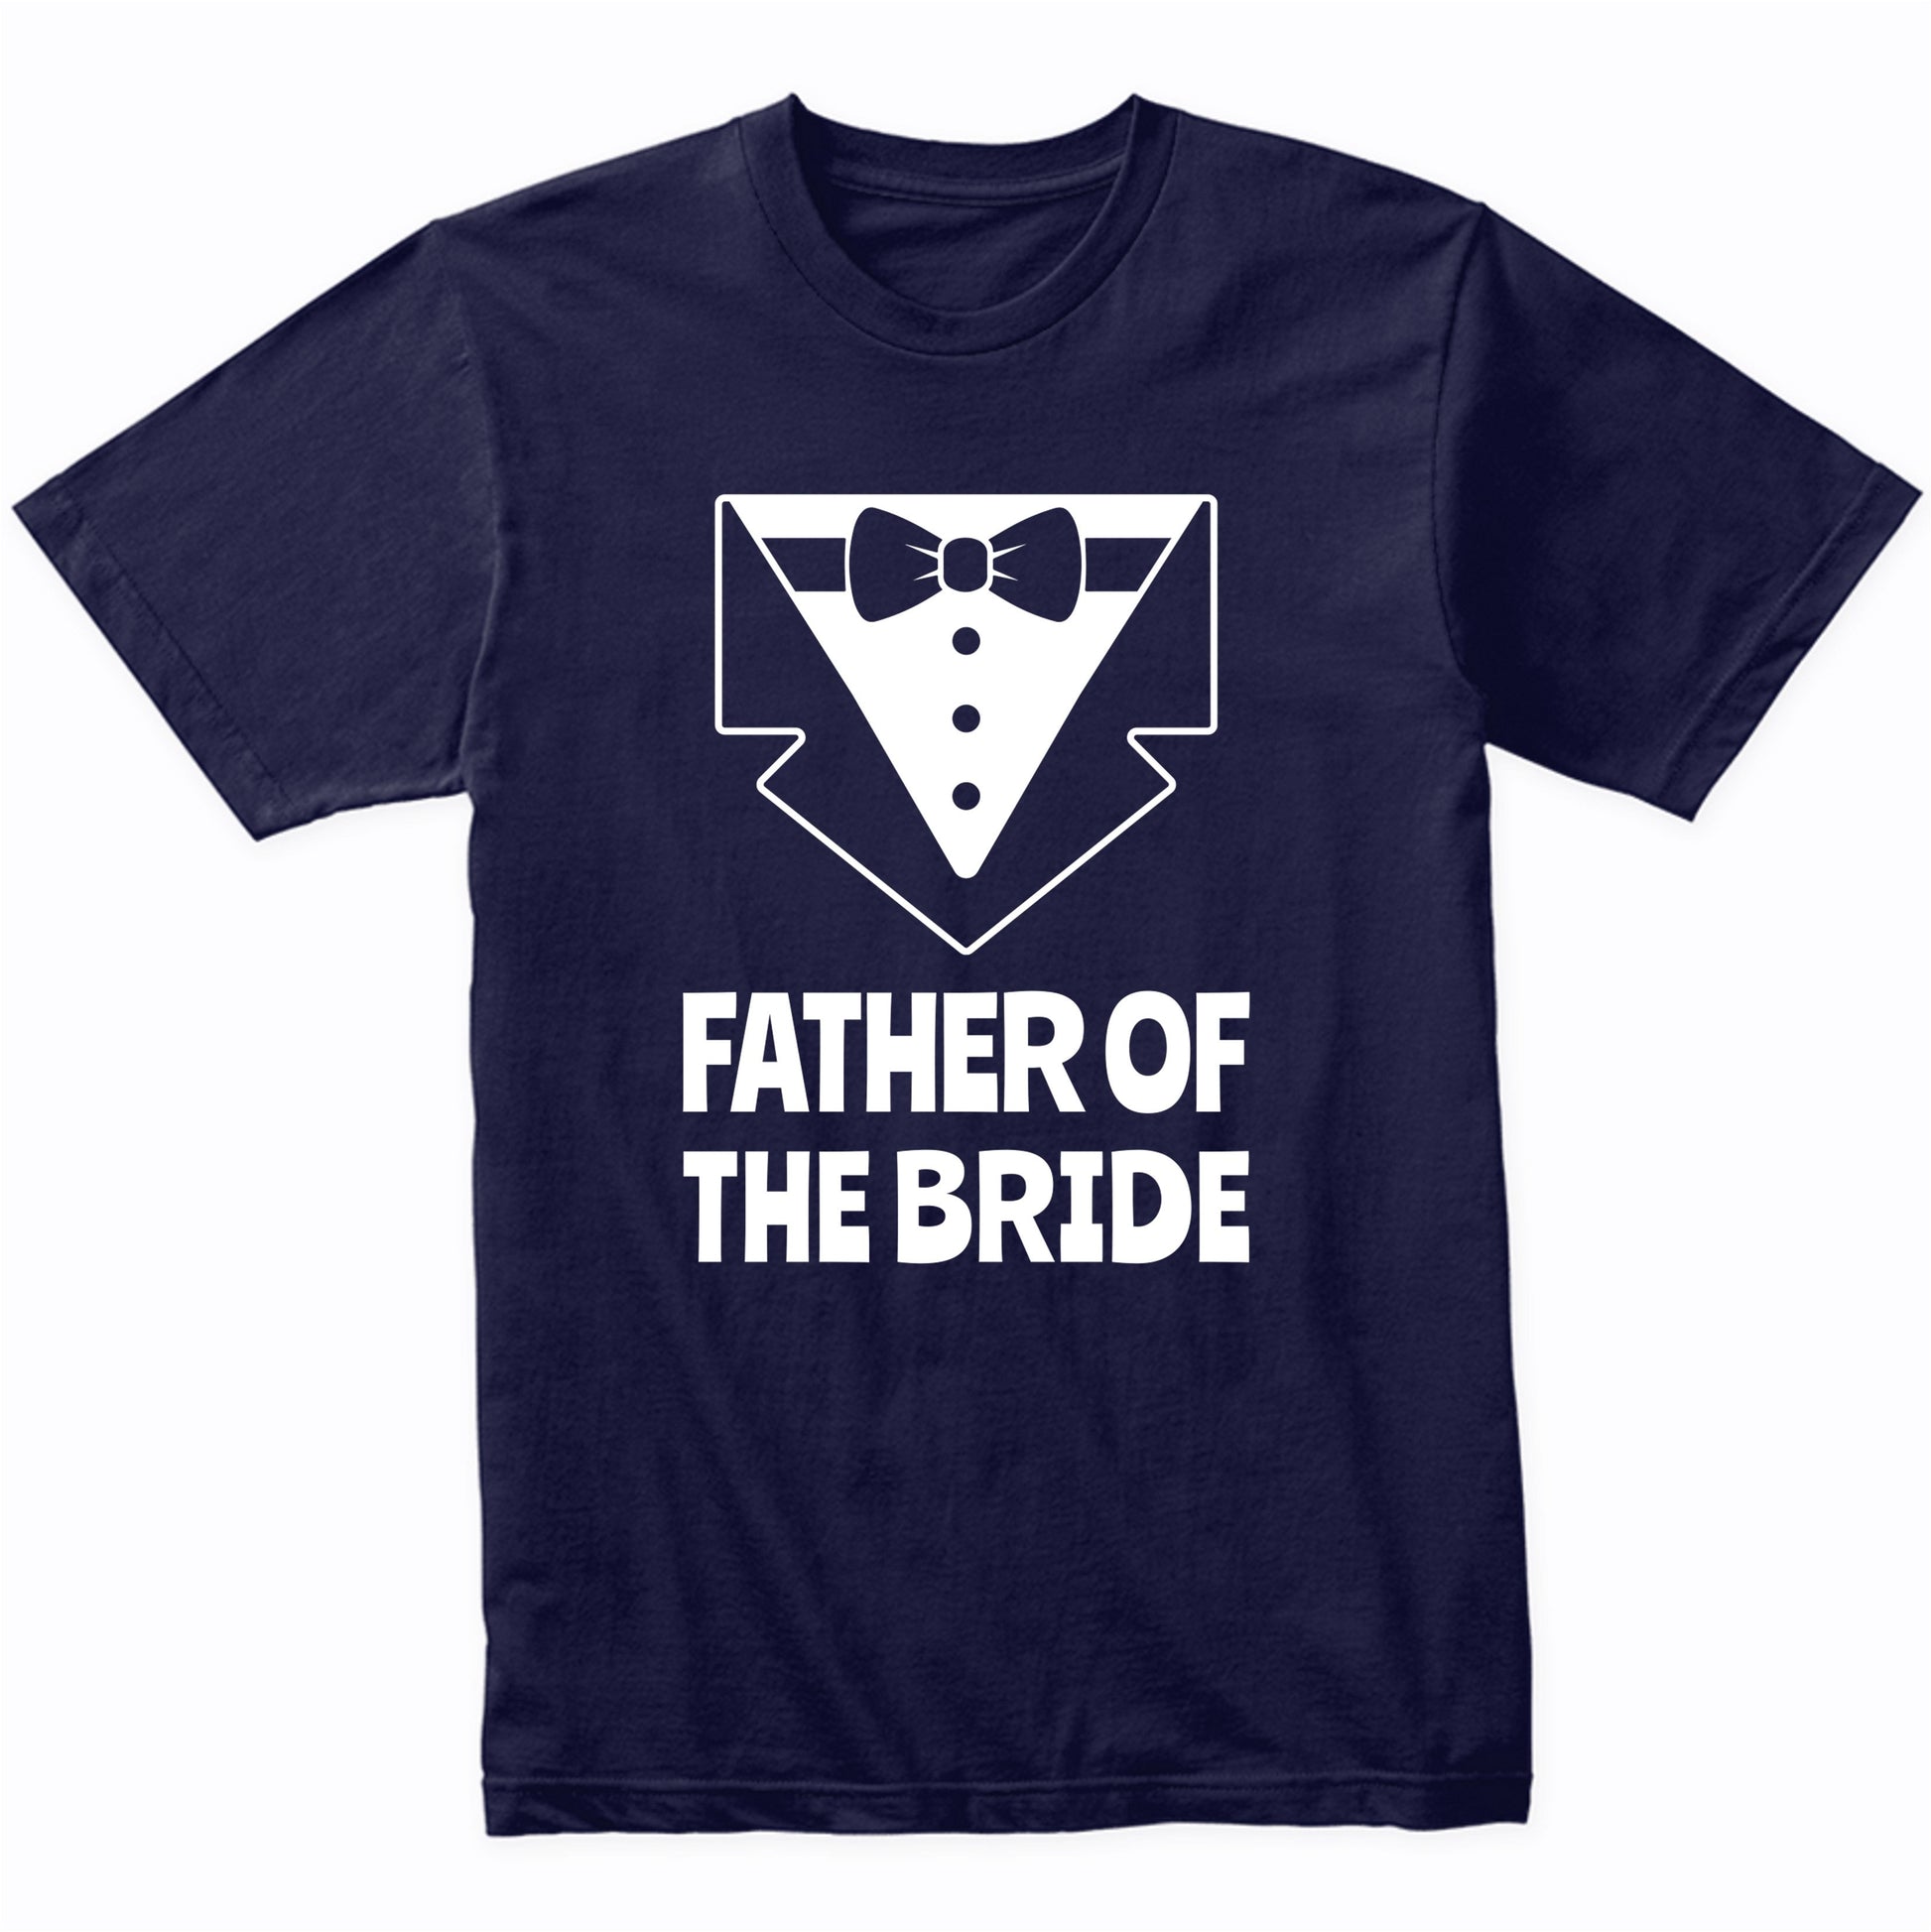 Father Of The Bride Shirt Wedding Party Shirt